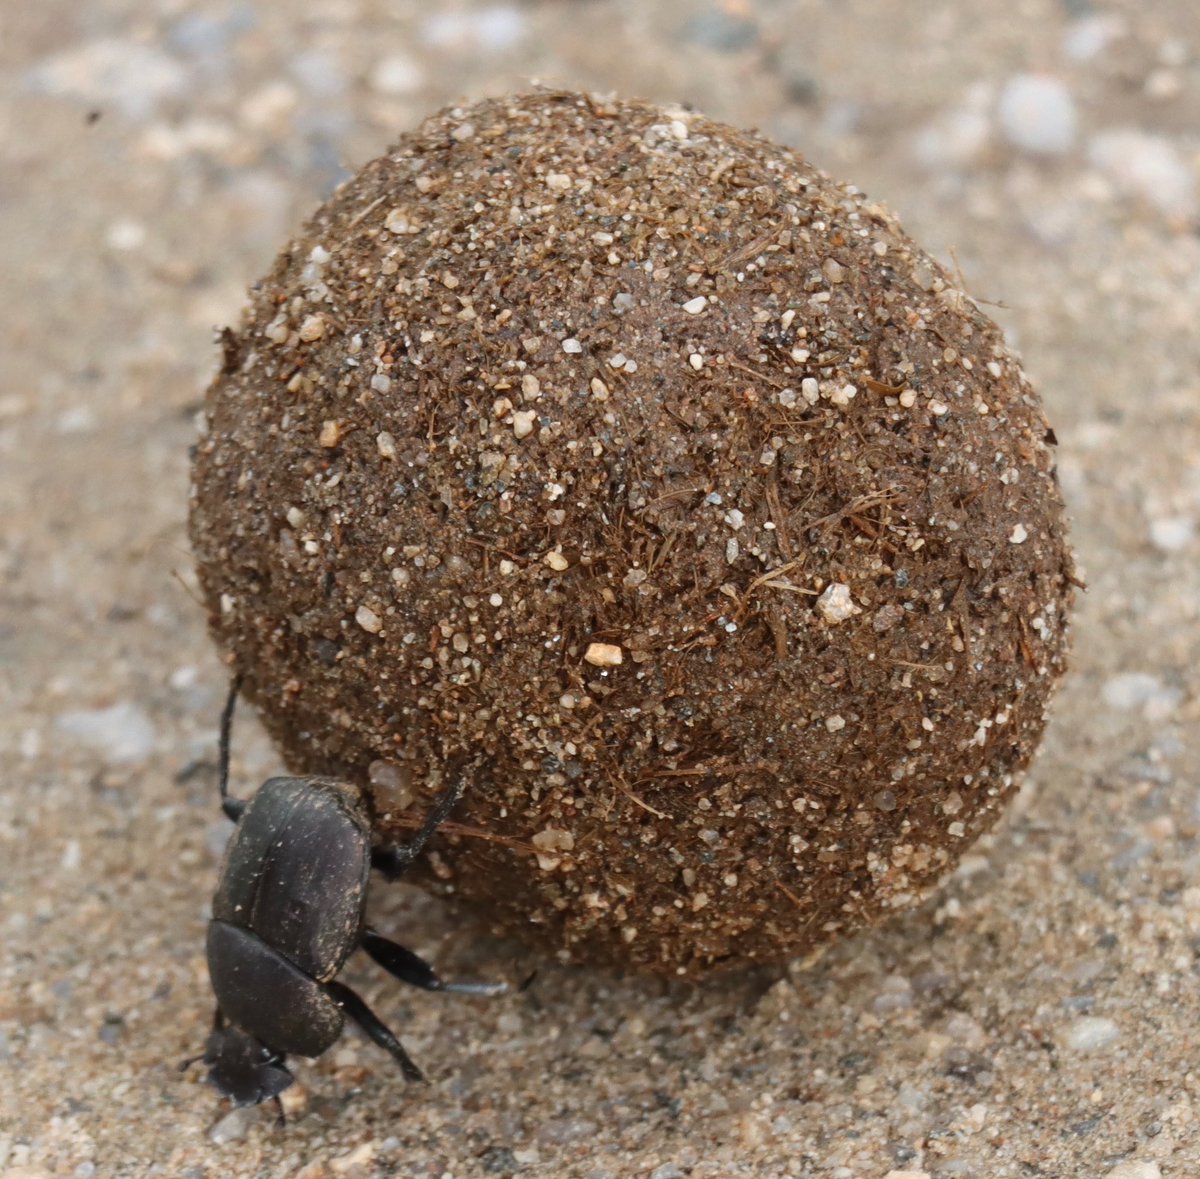 Important little guys…safari isn’t just about the big 5…it’s the little things too.  

Interesting fact……there are 800 unique species of dung beetle in South Africa, compared to 60 in the UK!

Learned this on safari with Wildlife-Dreams 

#wildlifedreams #safari #ANTARES